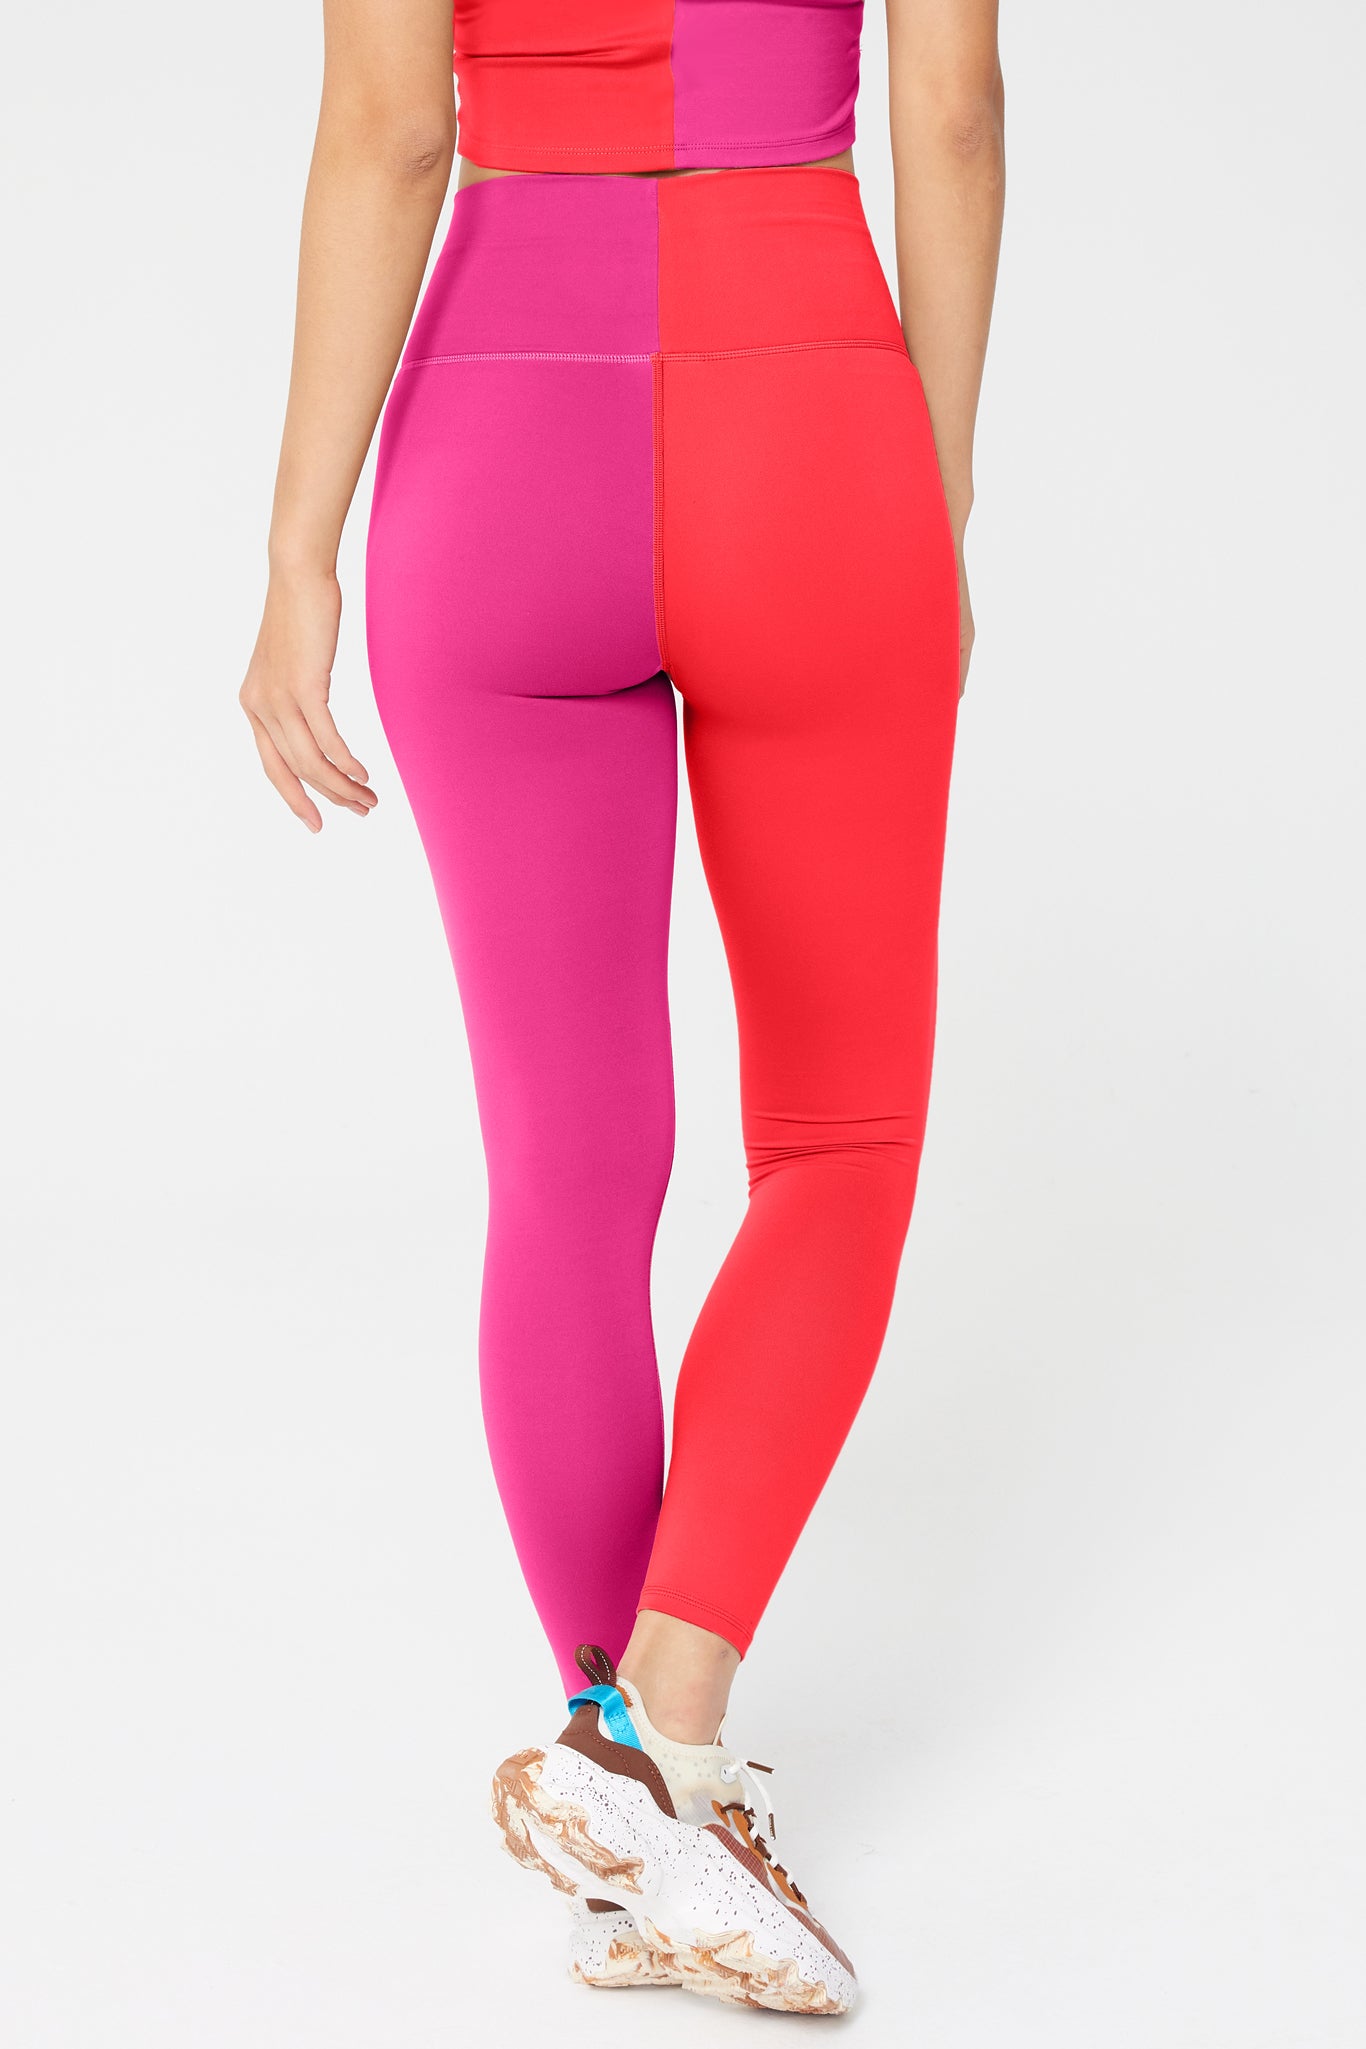 Two Tone TLC Leggings in Super Hot Red and Terez Pink –